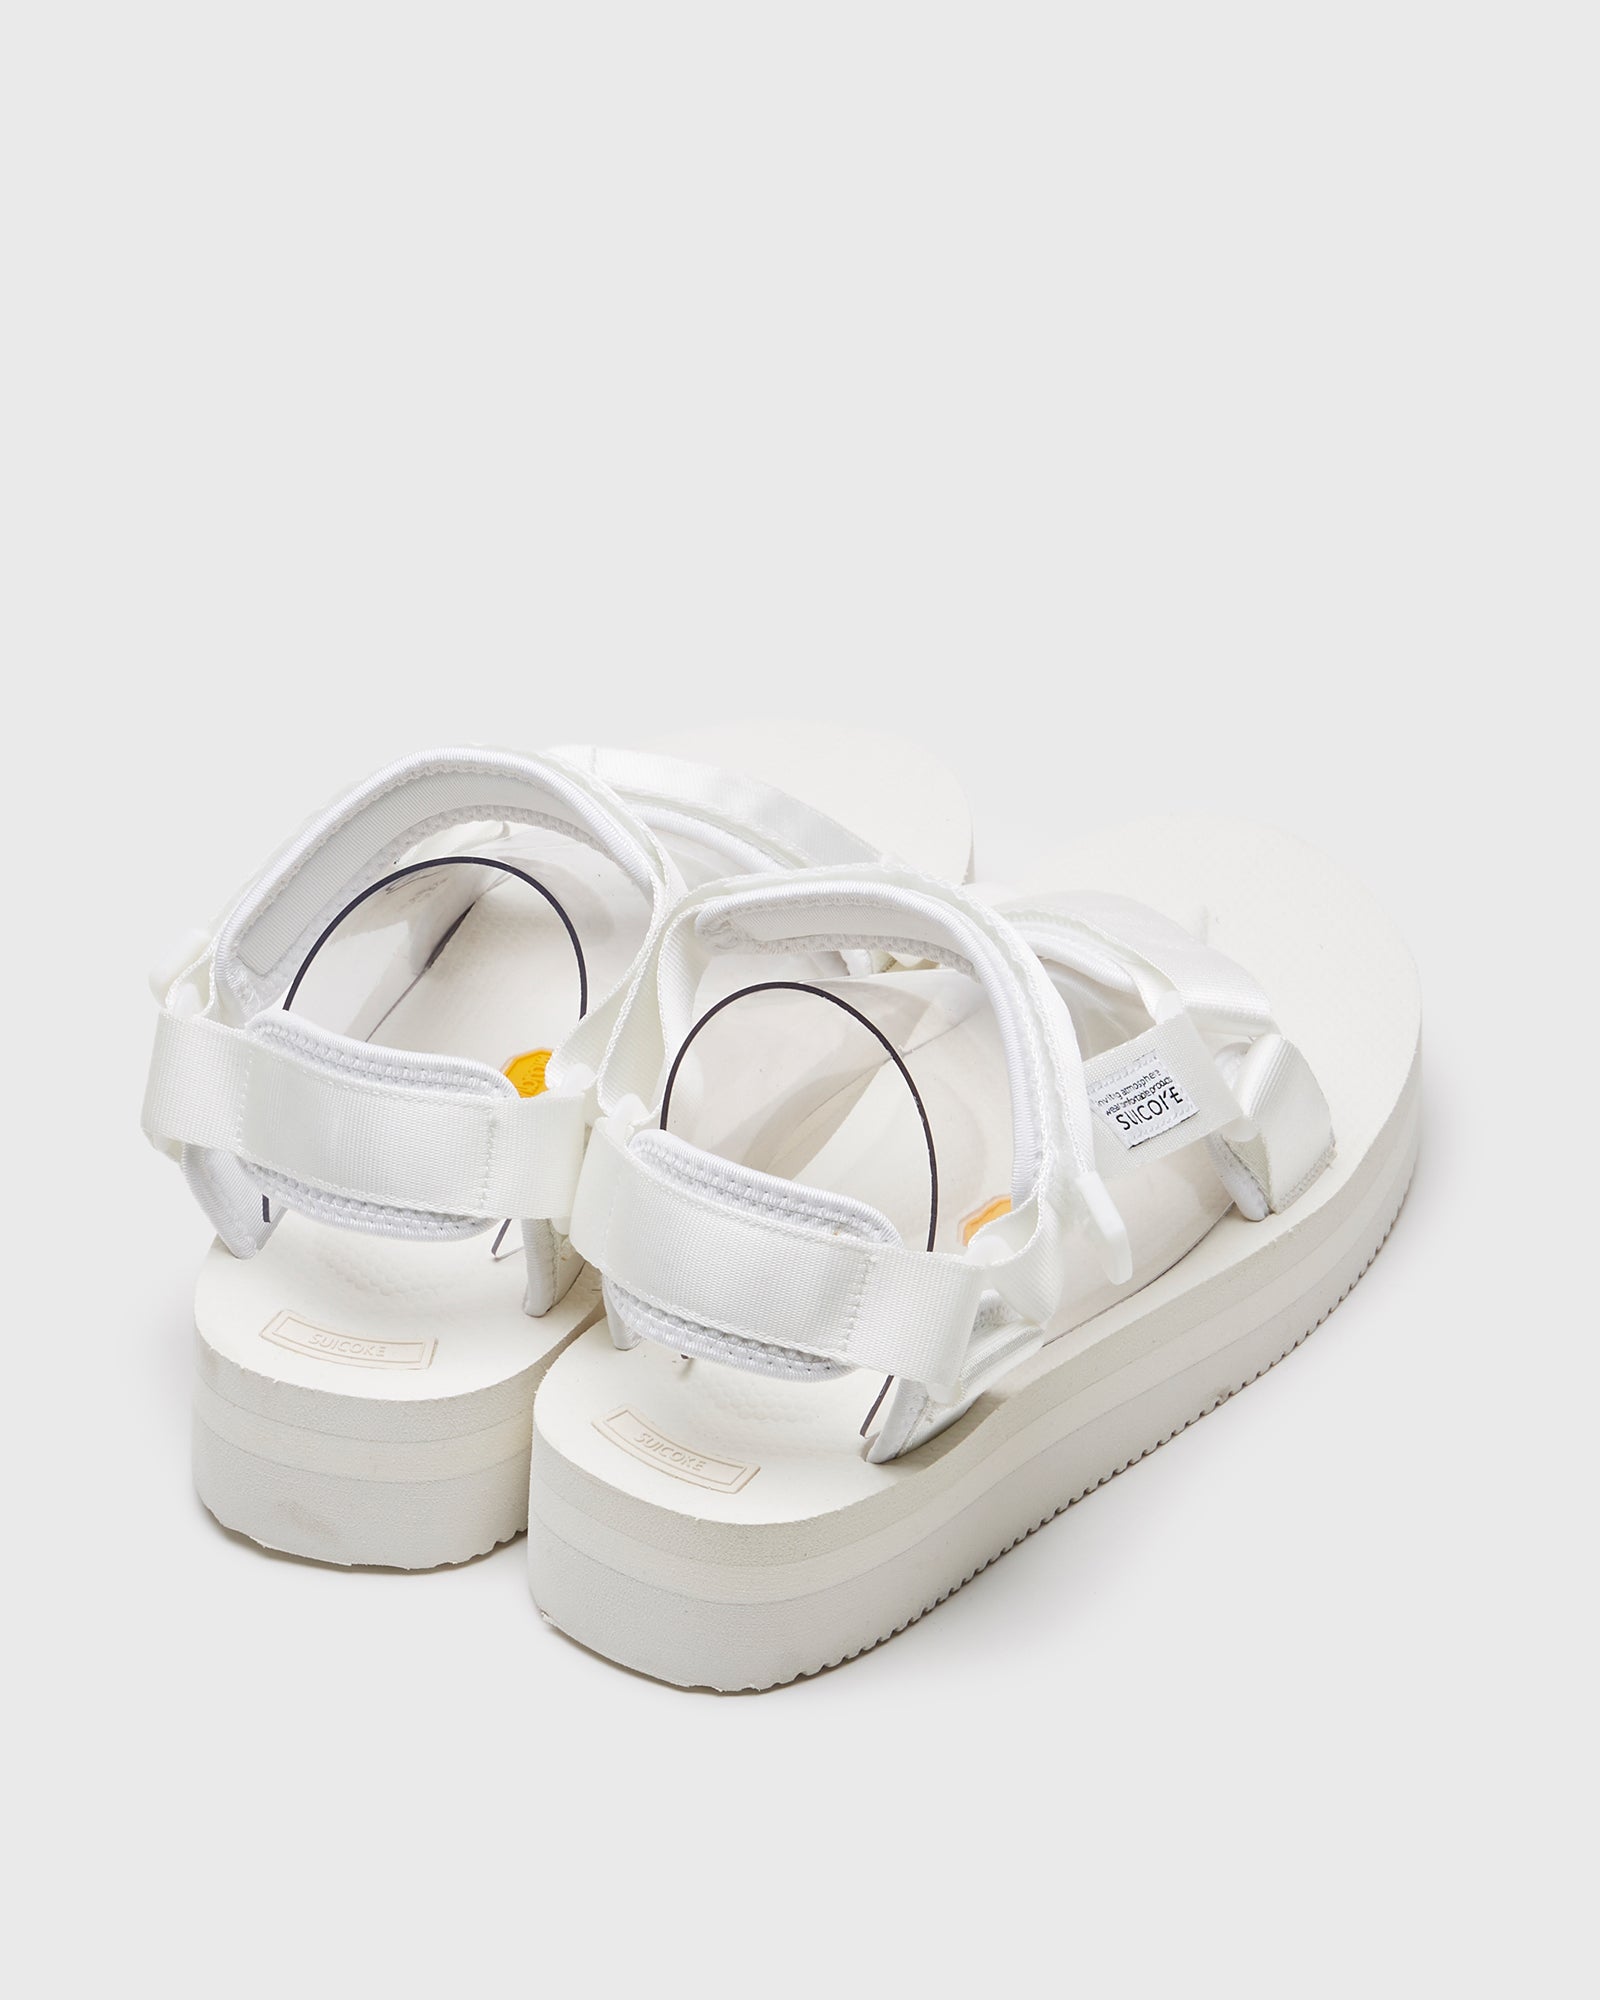 SUICOKE DEPA-V2PO in White OG-022V2PO | Shop from eightywingold an official brand partner for SUICOKE Canada and US.